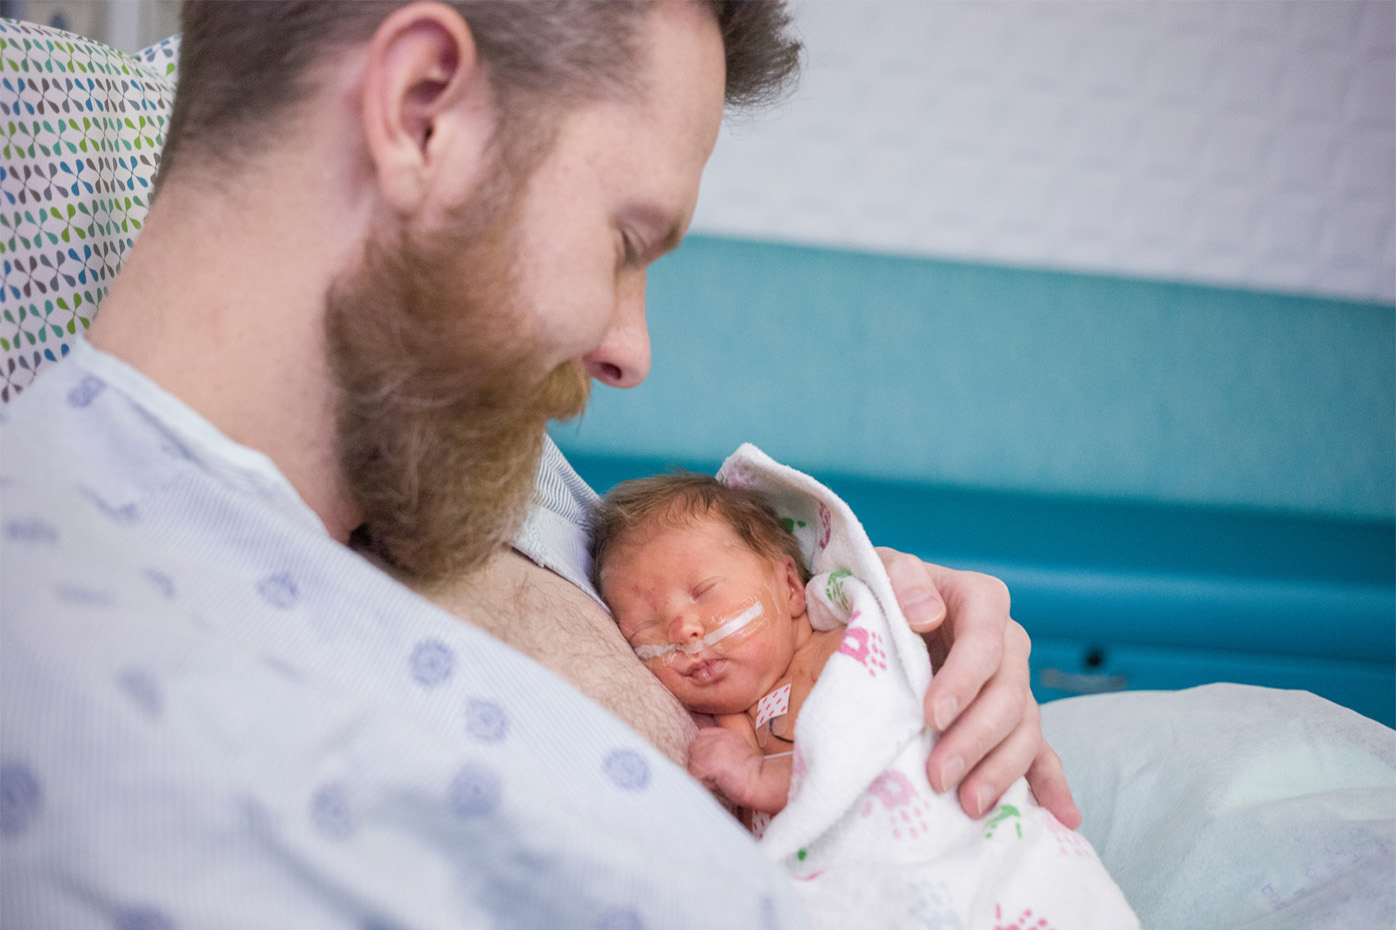 A father holds a preterm baby next to his bare chest in a hospital